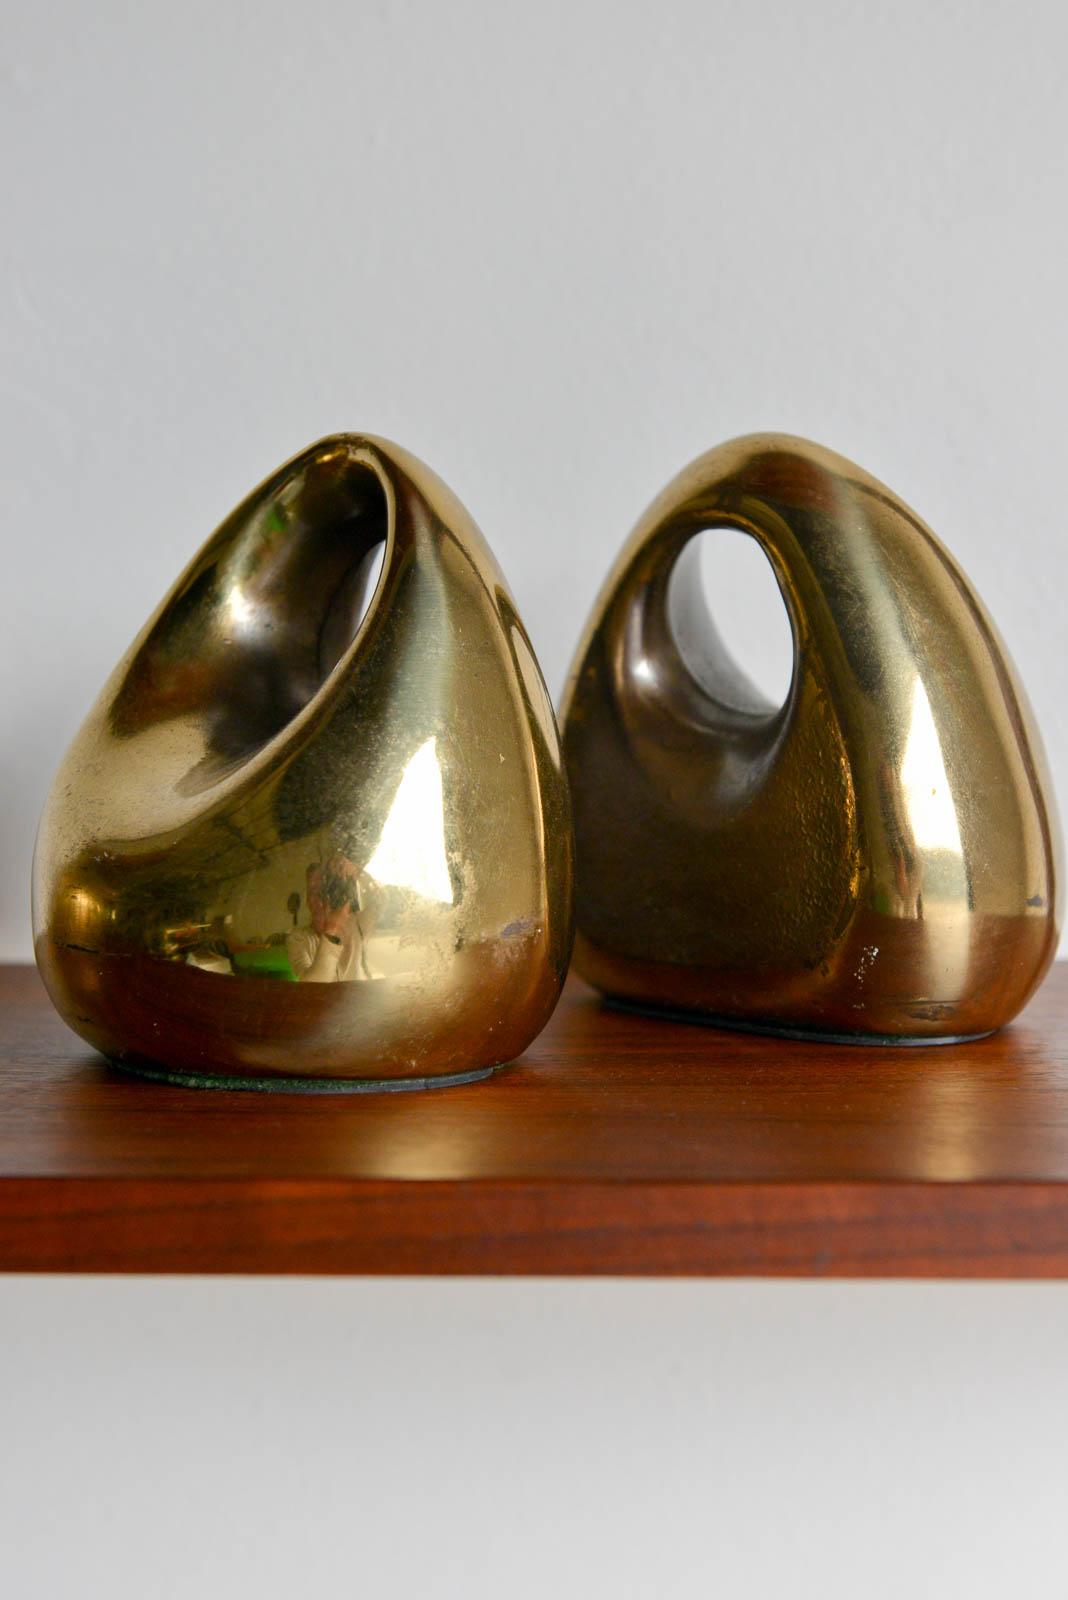 Mid-Century Modern Brass Bookends by Ben Seibel for Jenfred Ware, ca. 1960